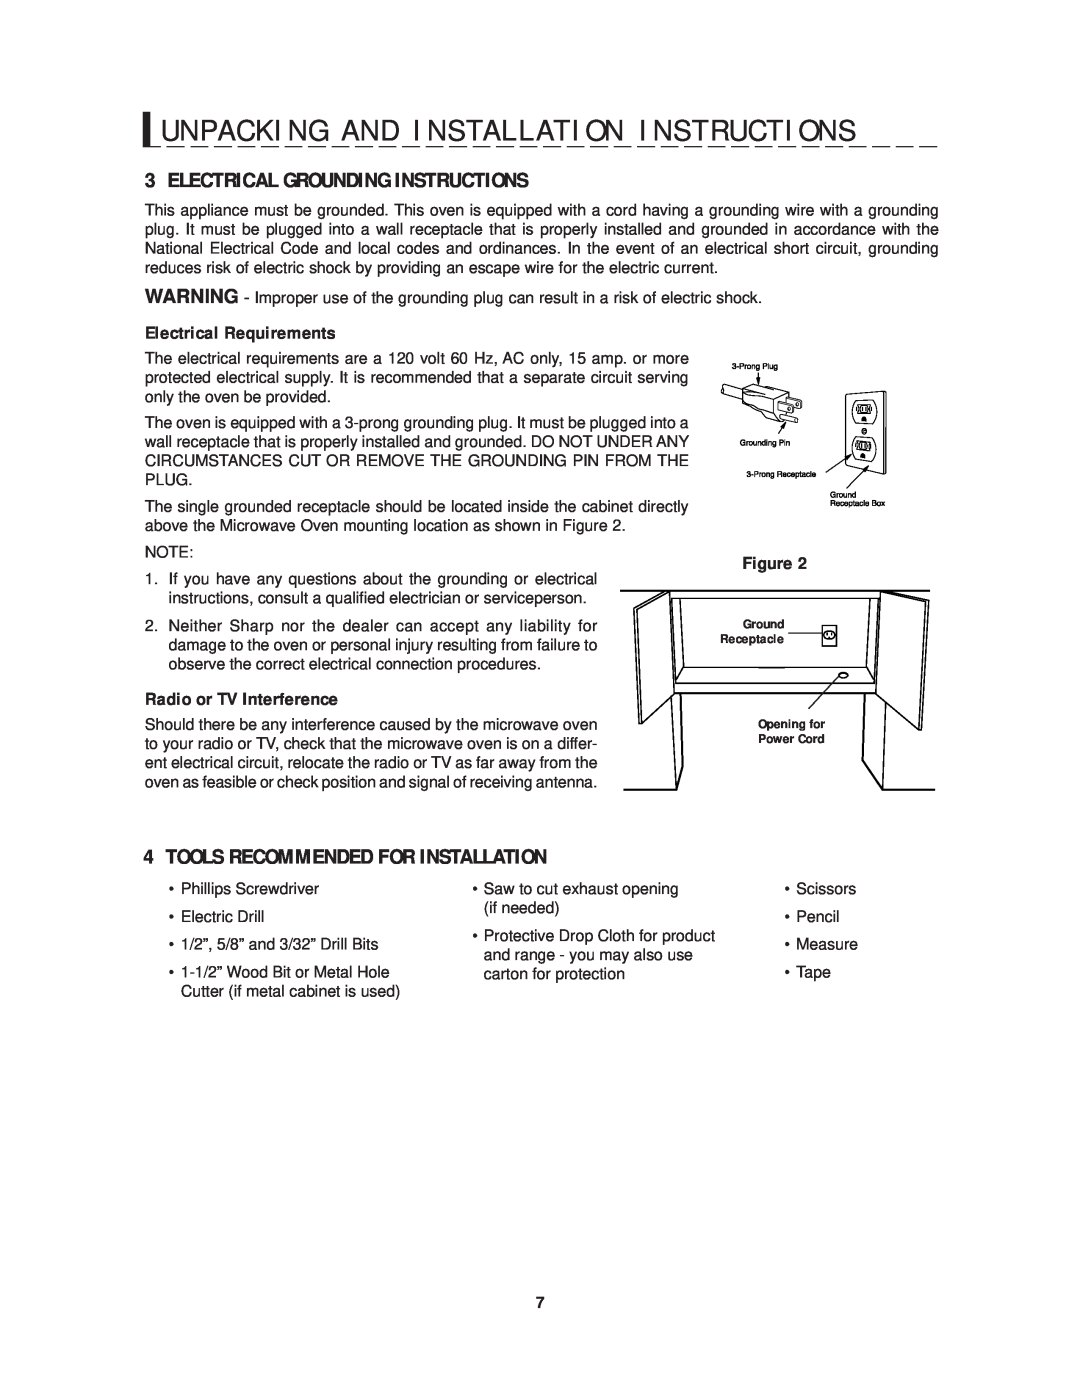 Sharp R-1214 Electrical Grounding Instructions, Tools Recommended For Installation, Electrical Requirements 